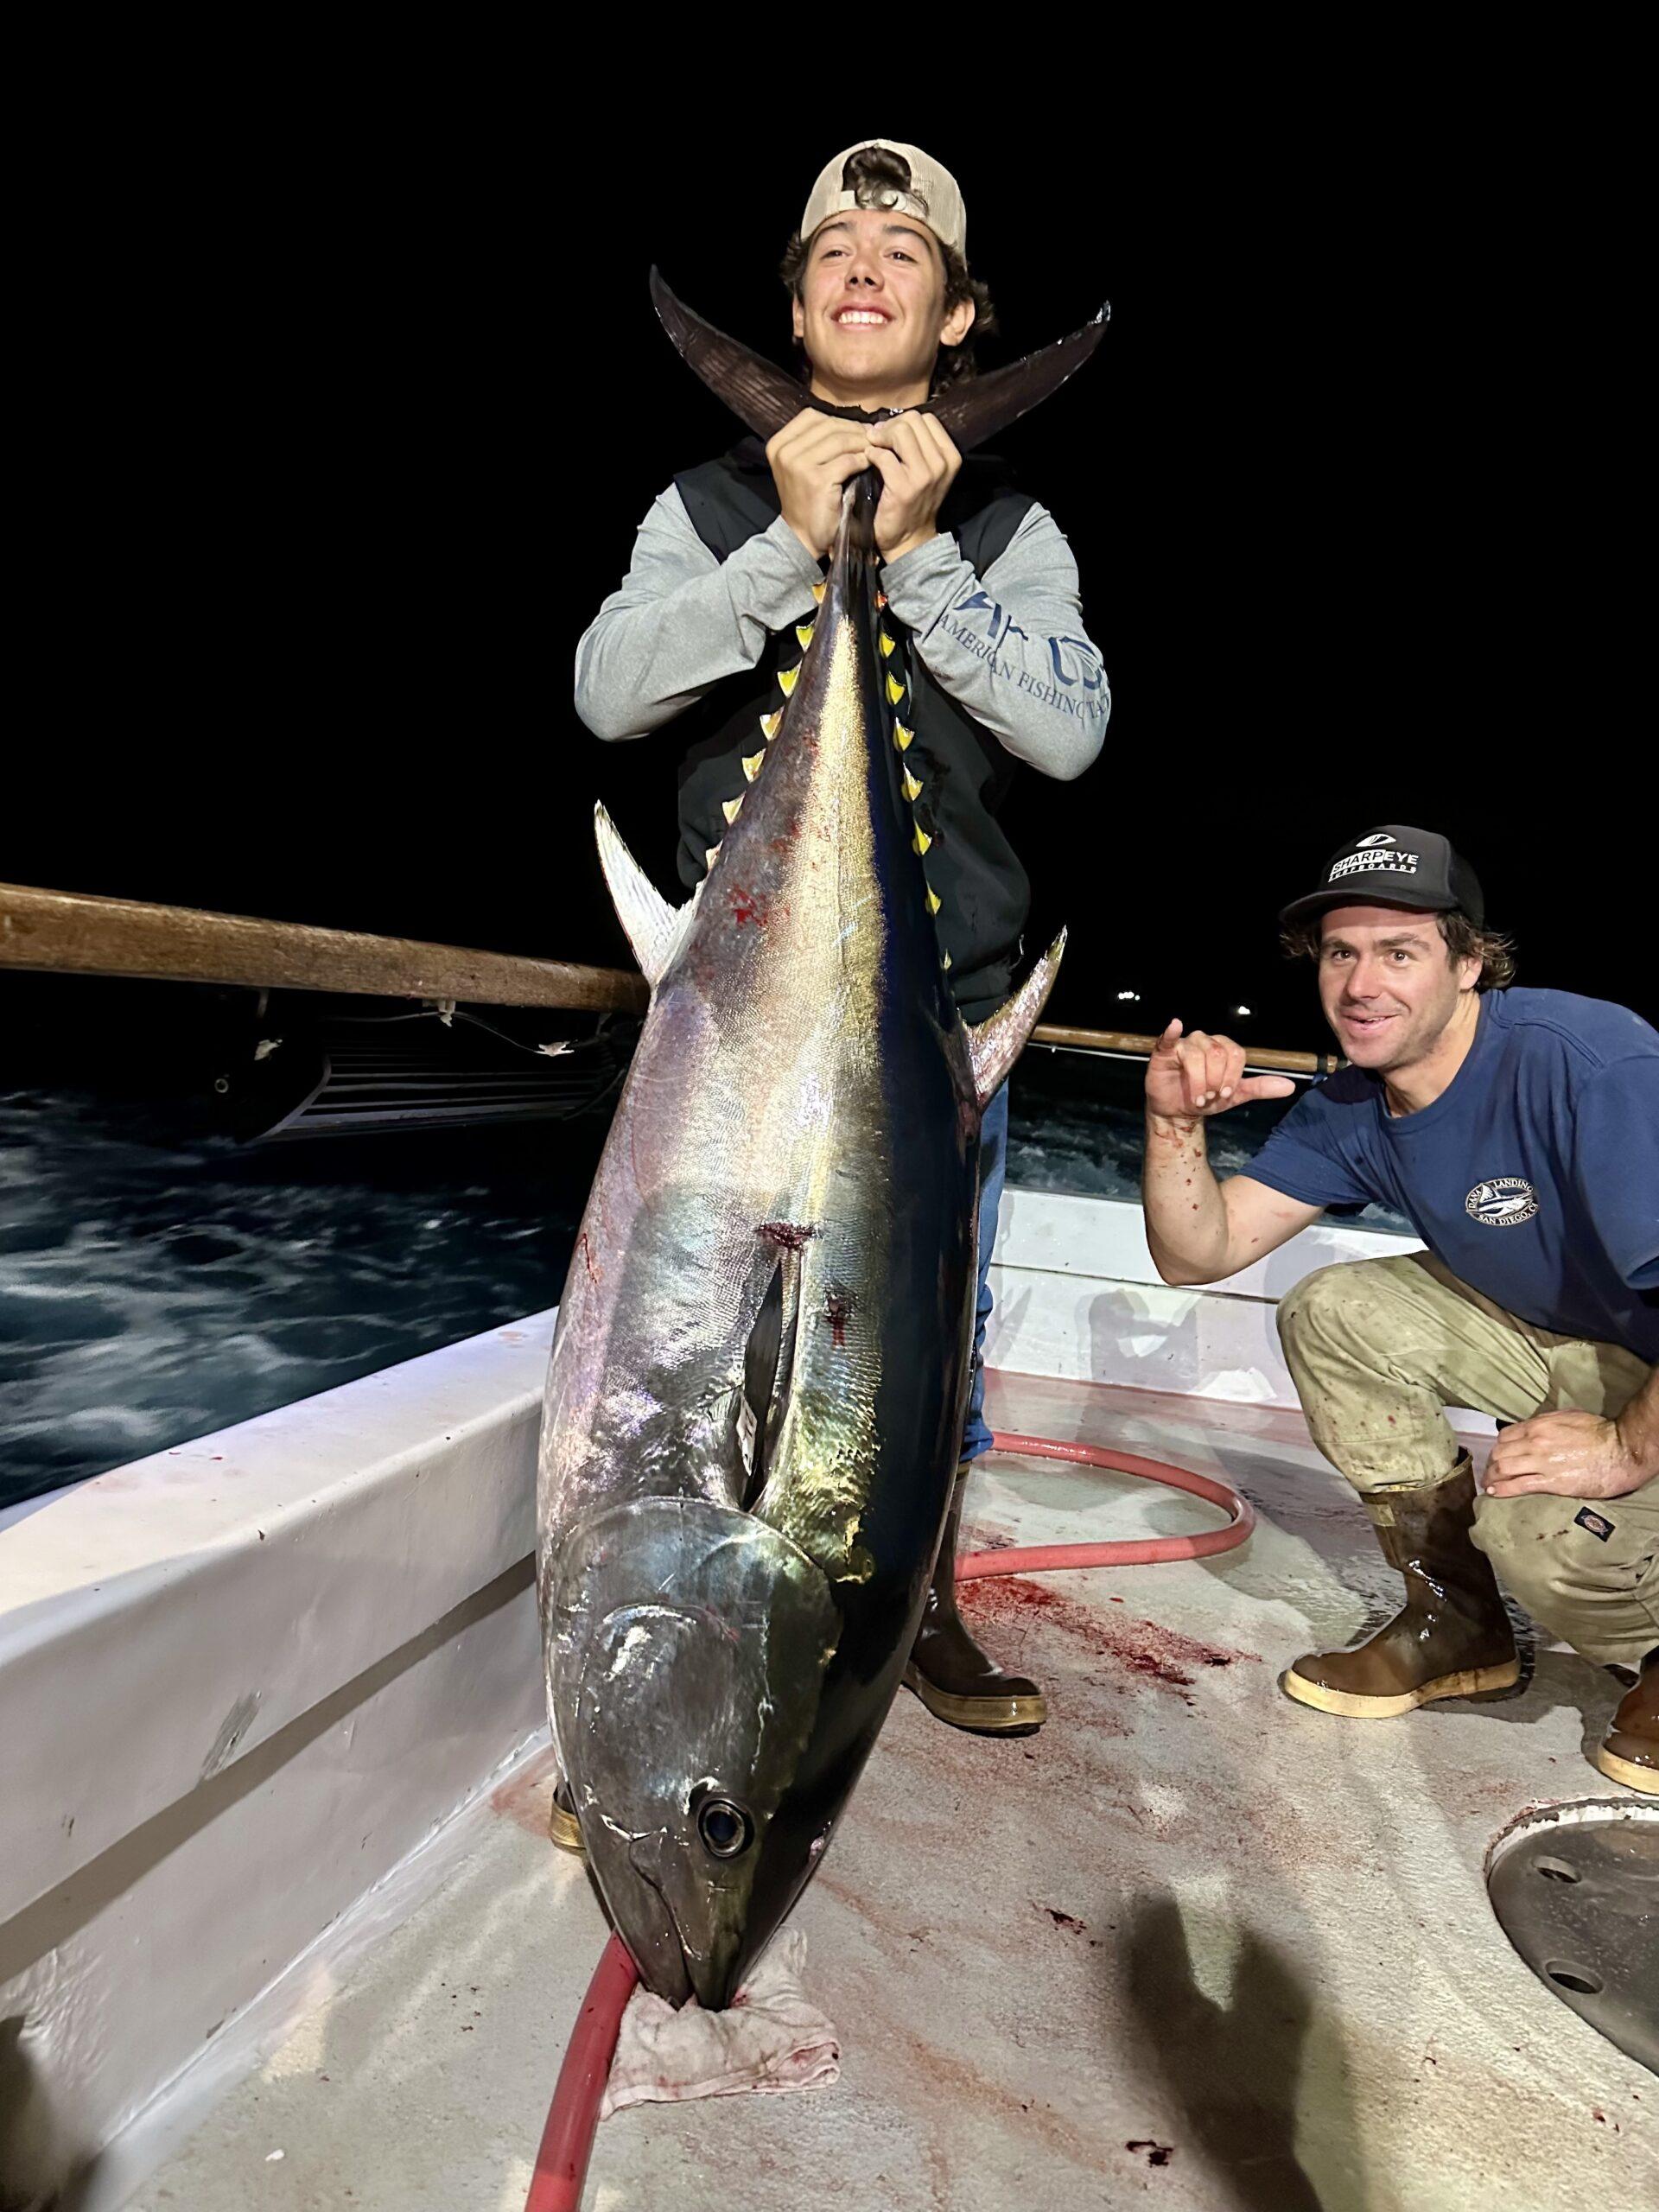 Captain Shane with an angler and large bluefin tuna.